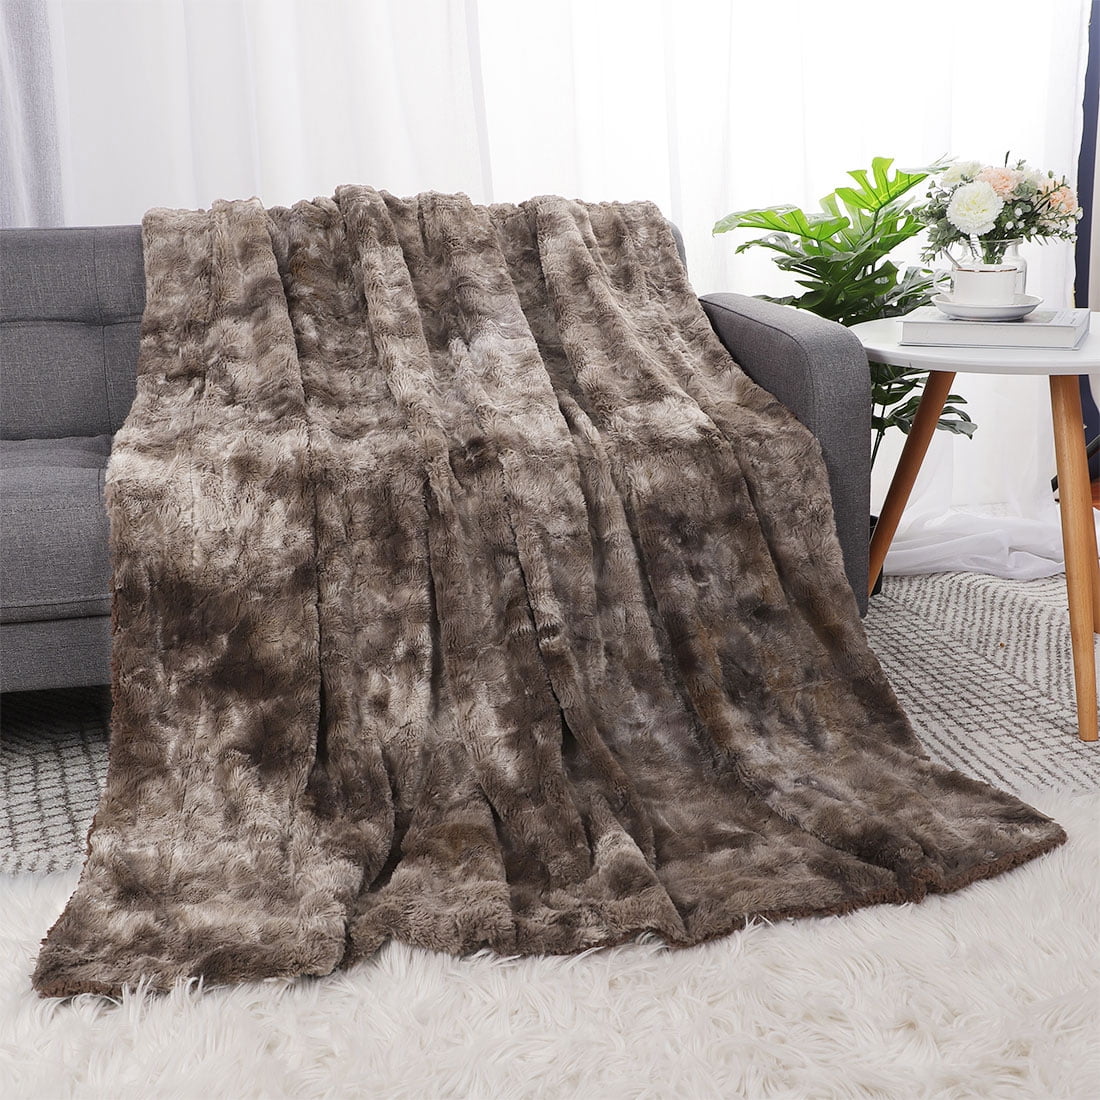 Large Luxury Supersoft Faux Fur Mink Throw Dolphins 